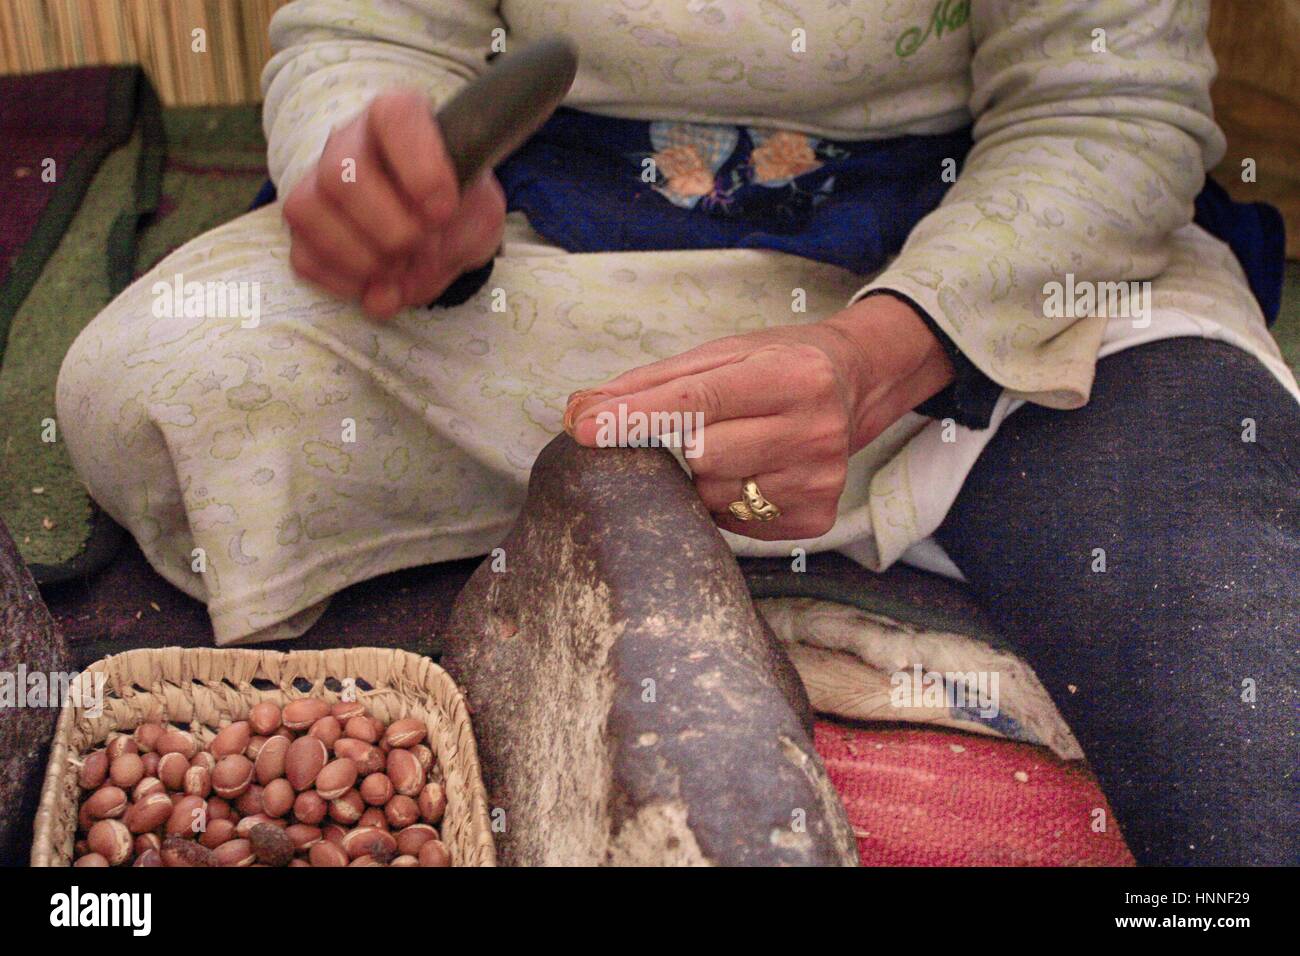 Argan oil production in women cooperative in morocco Stock Photo